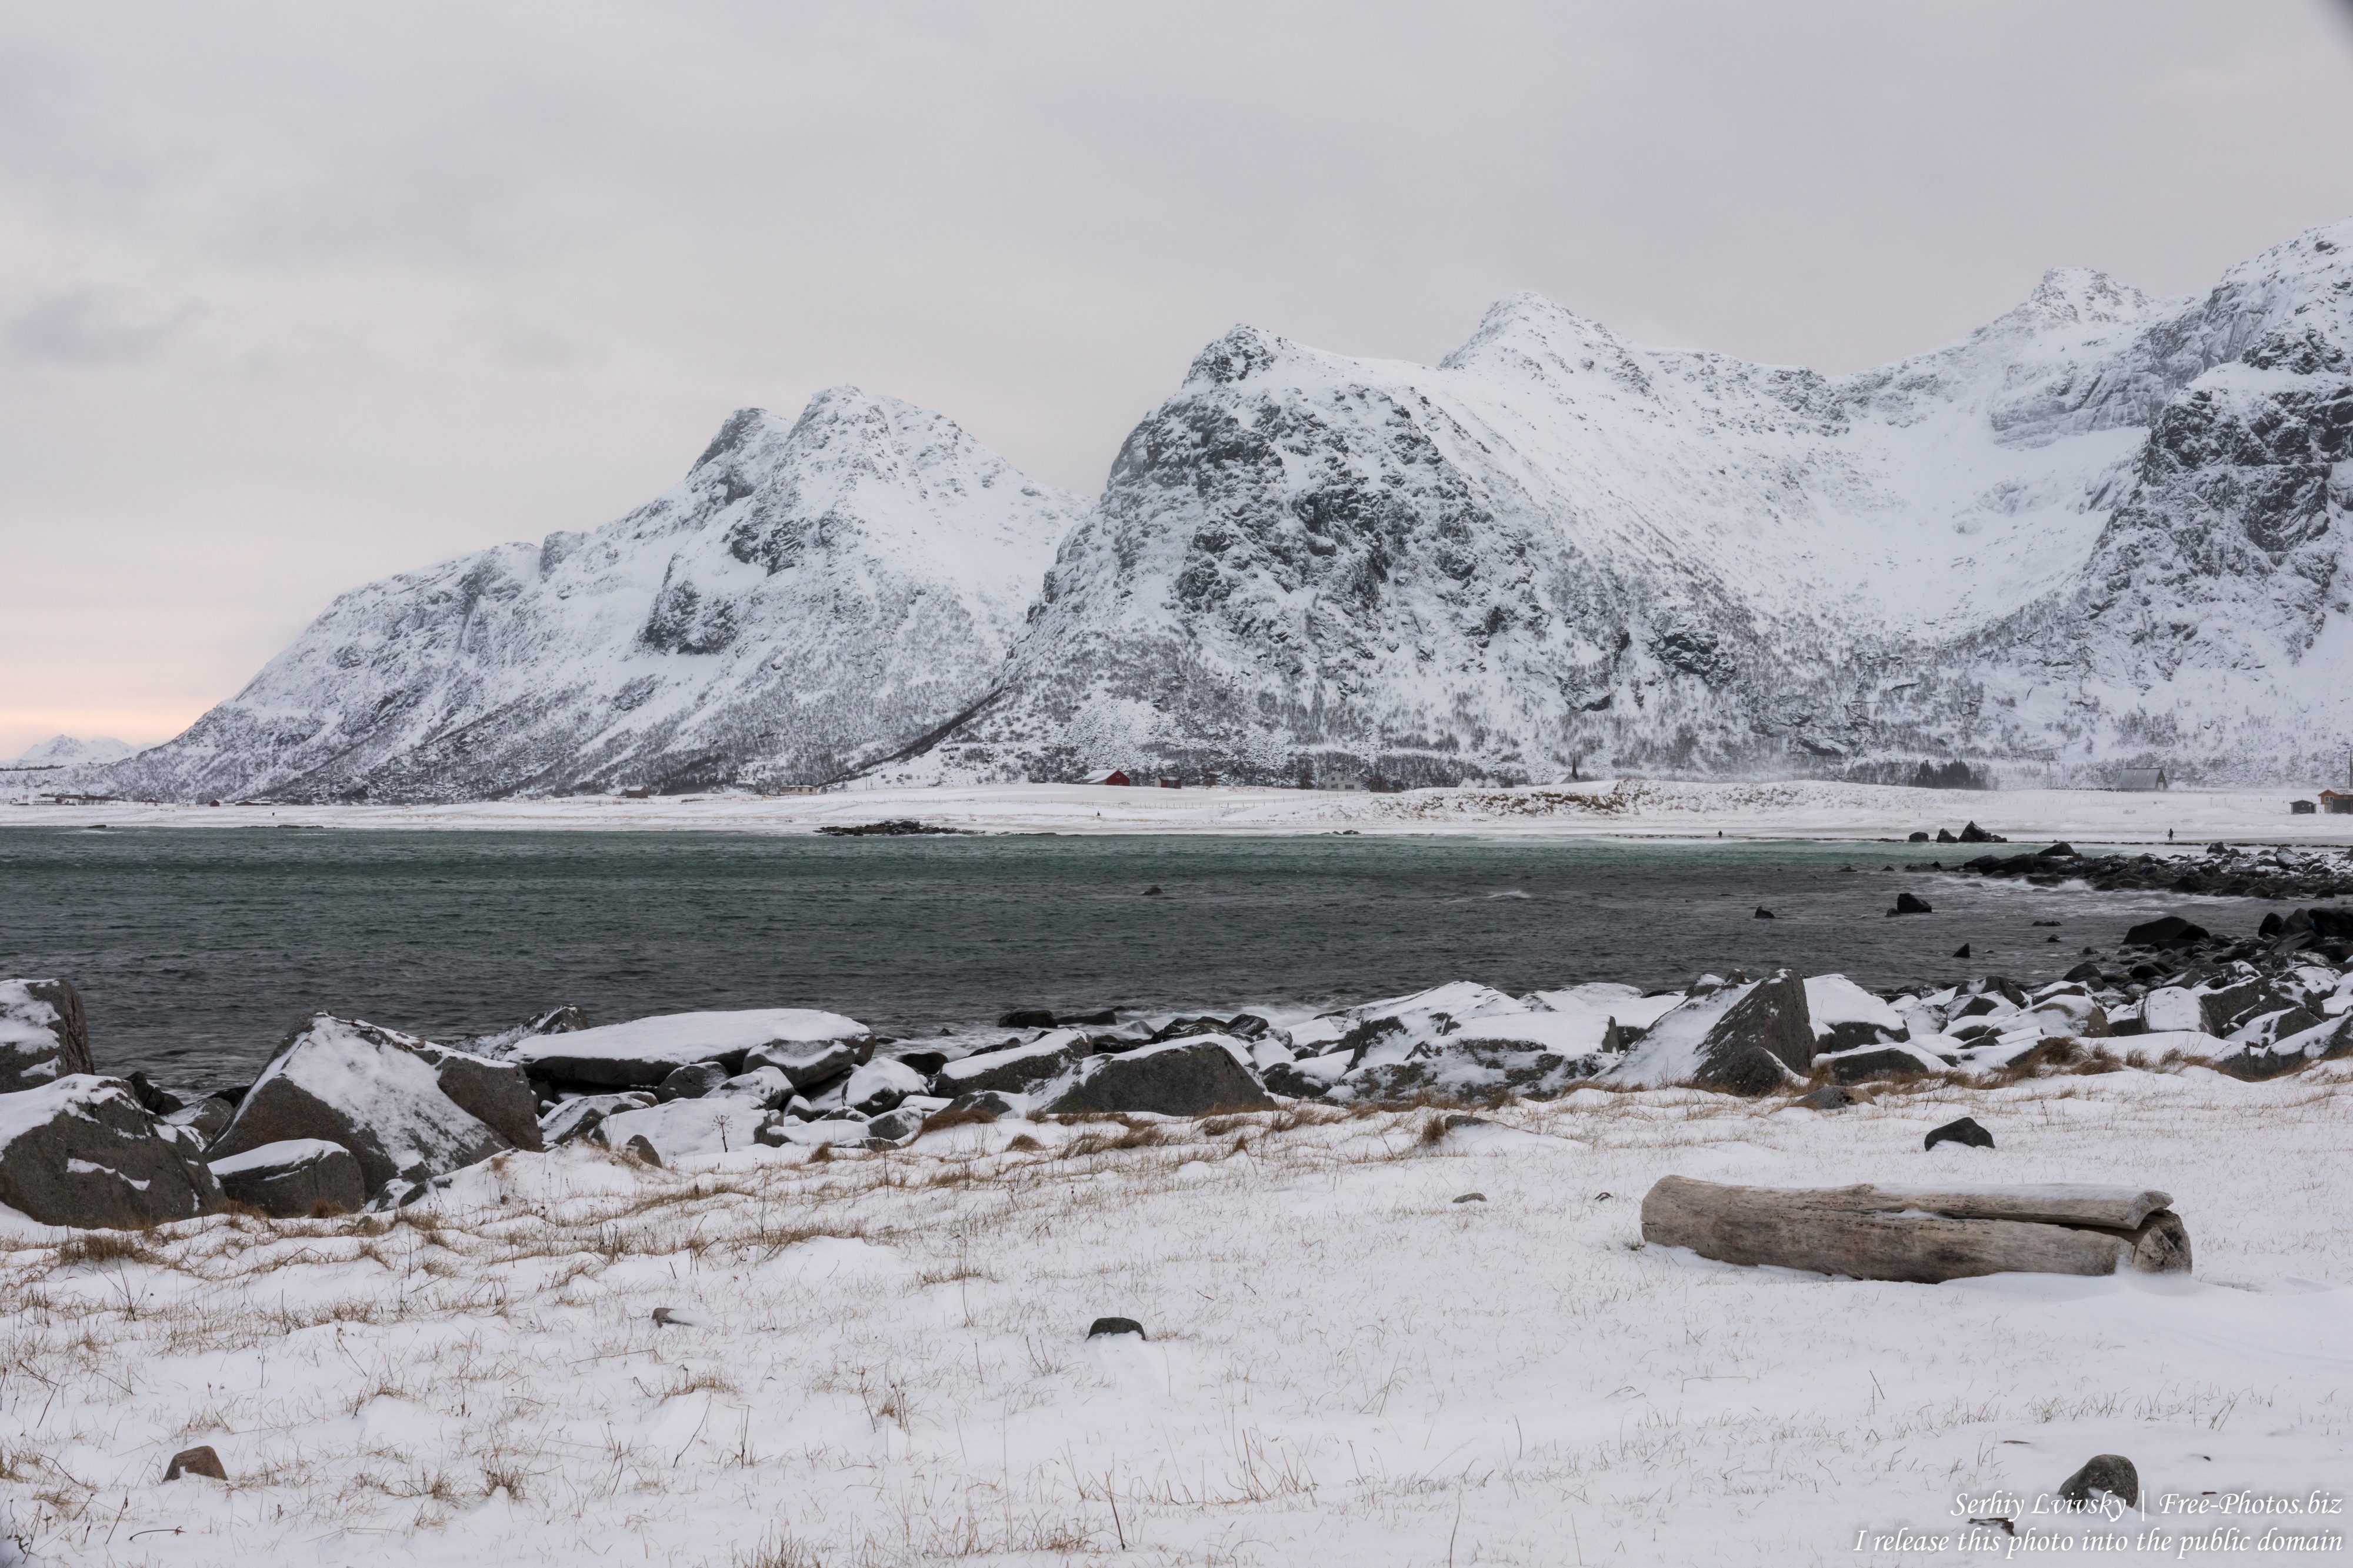 Skagsanden beach, Norway, photographed in February 2020 by Serhiy Lvivsky, picture 22